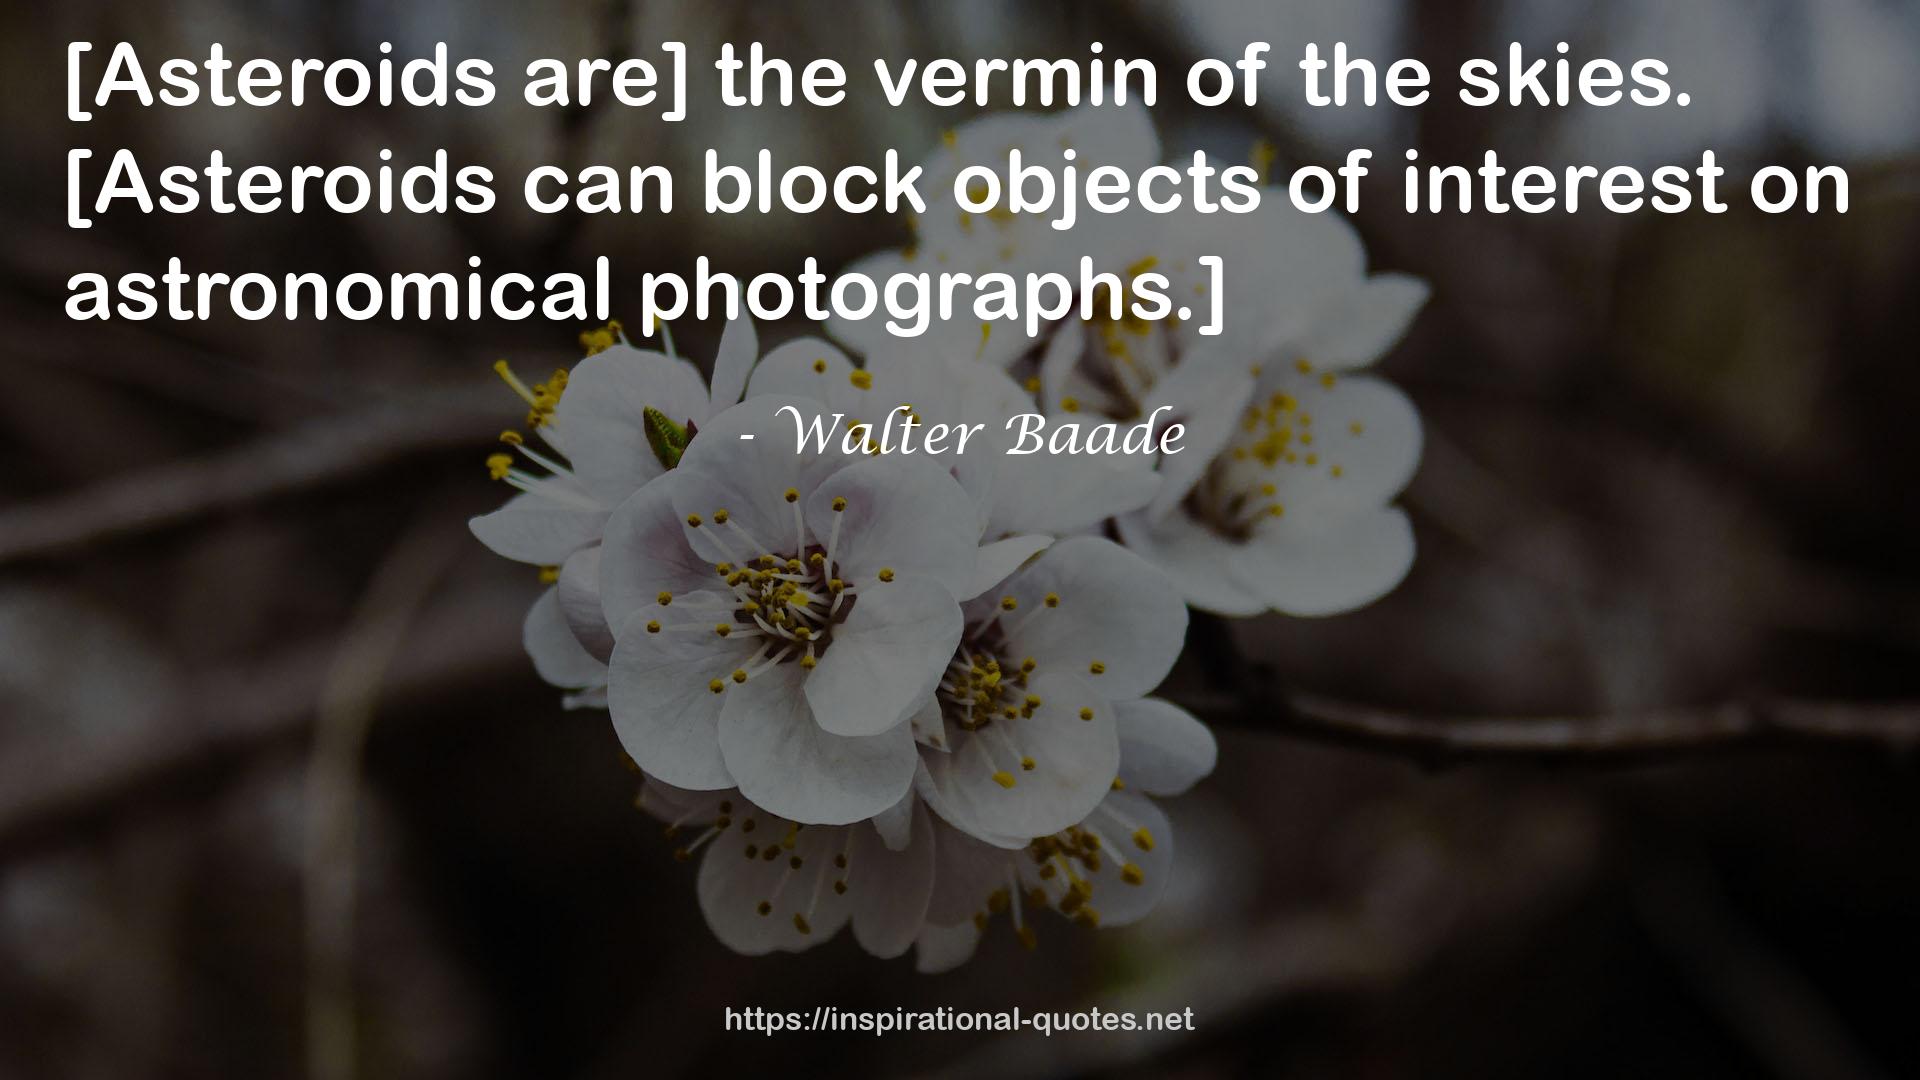 Walter Baade QUOTES